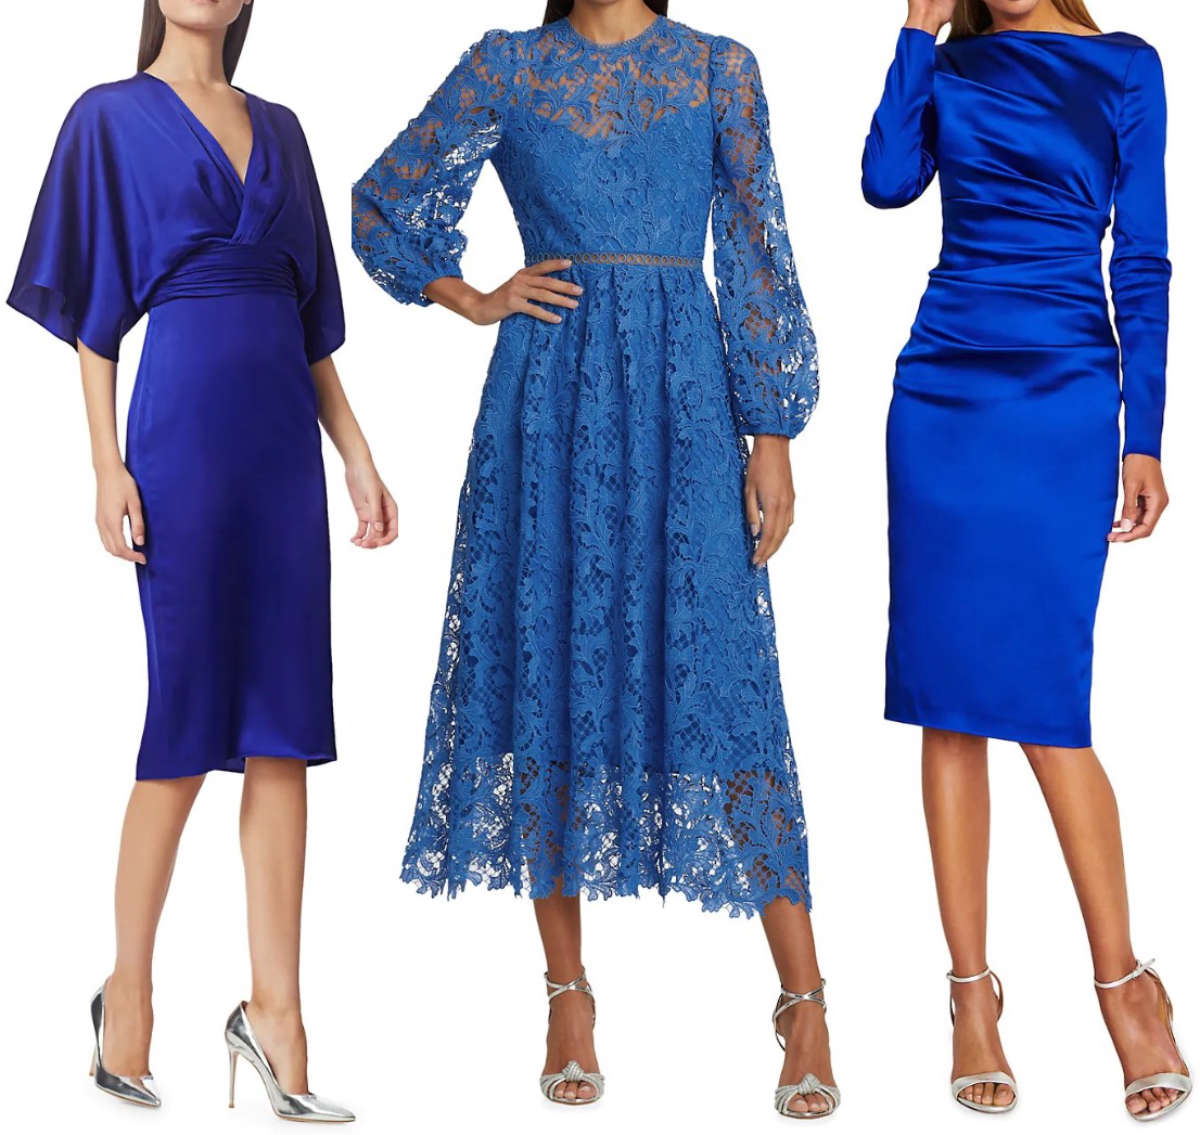 Showing you what color shoes for blue dresses & royal blue dresses look fab!